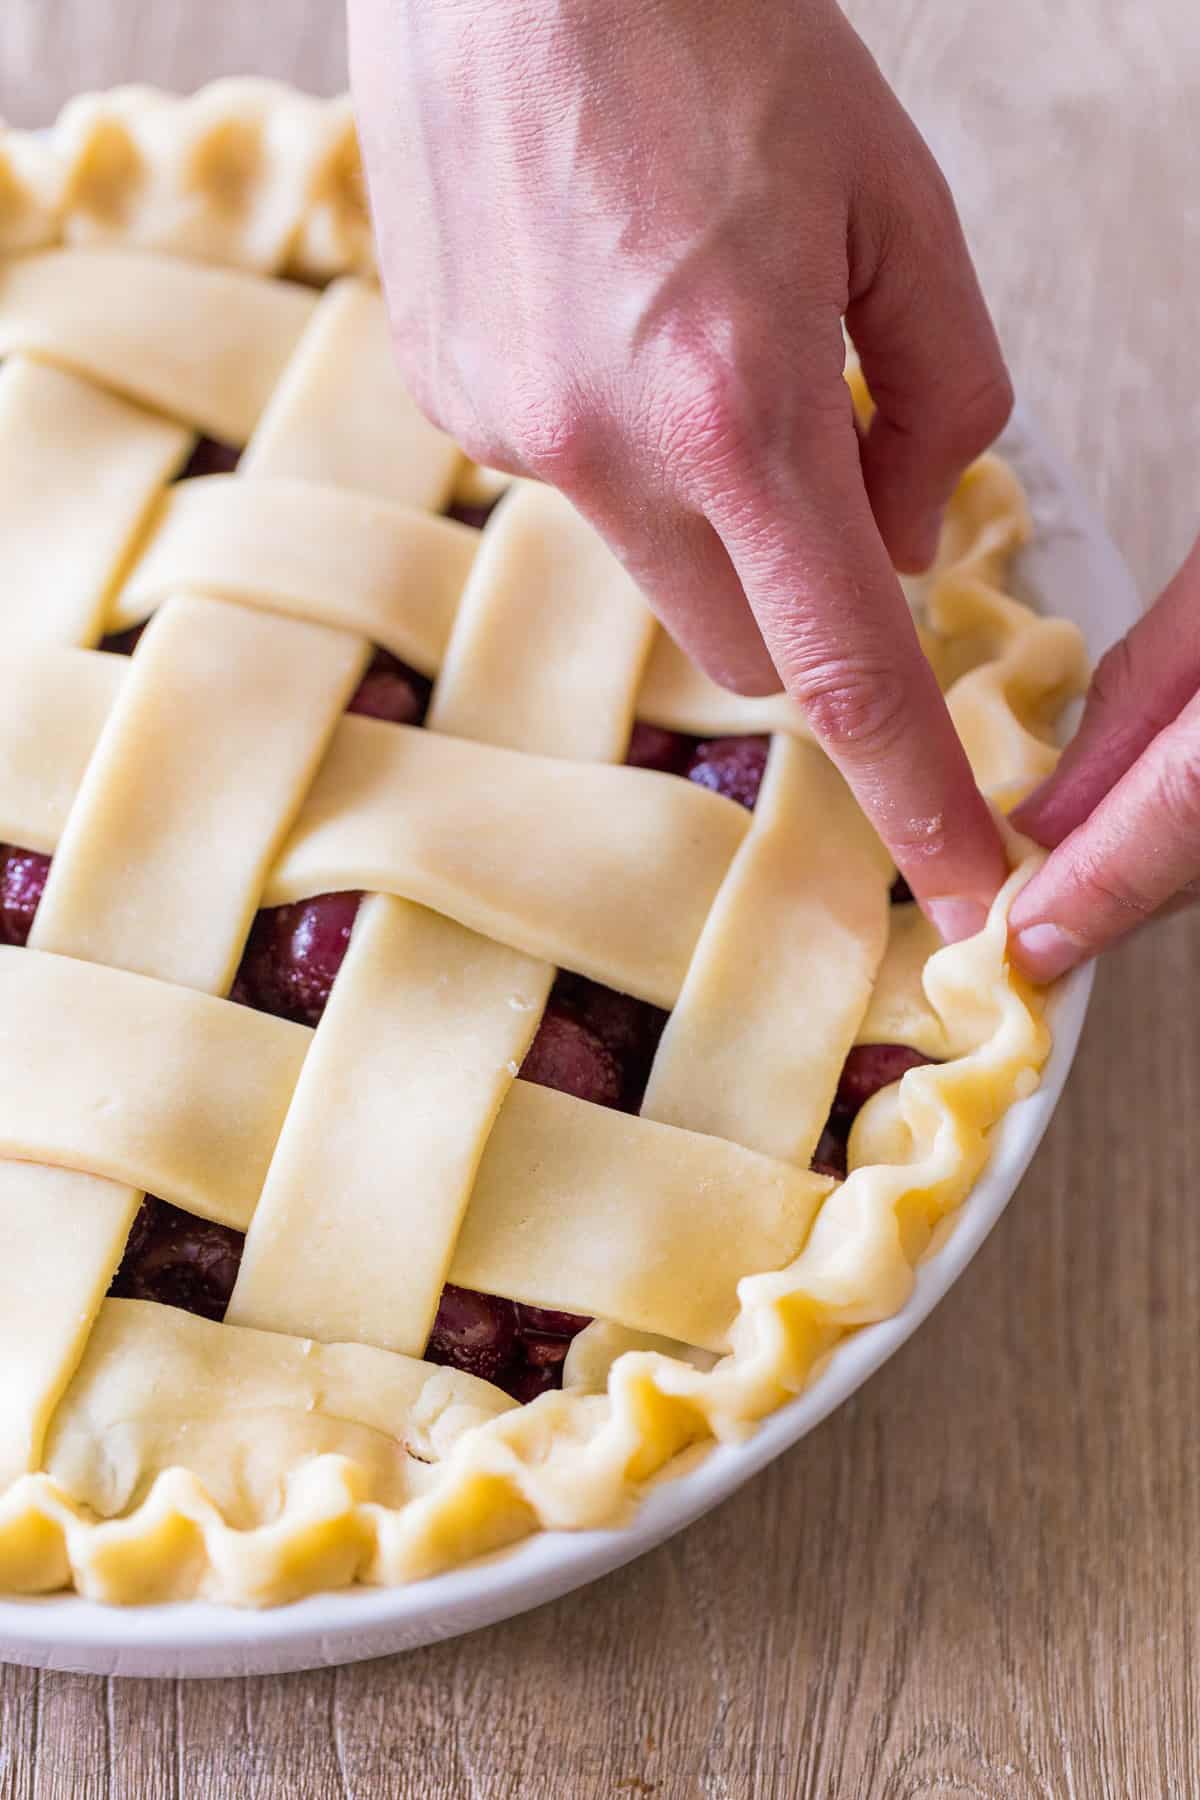 How to crimp a pie crust for cherry pie